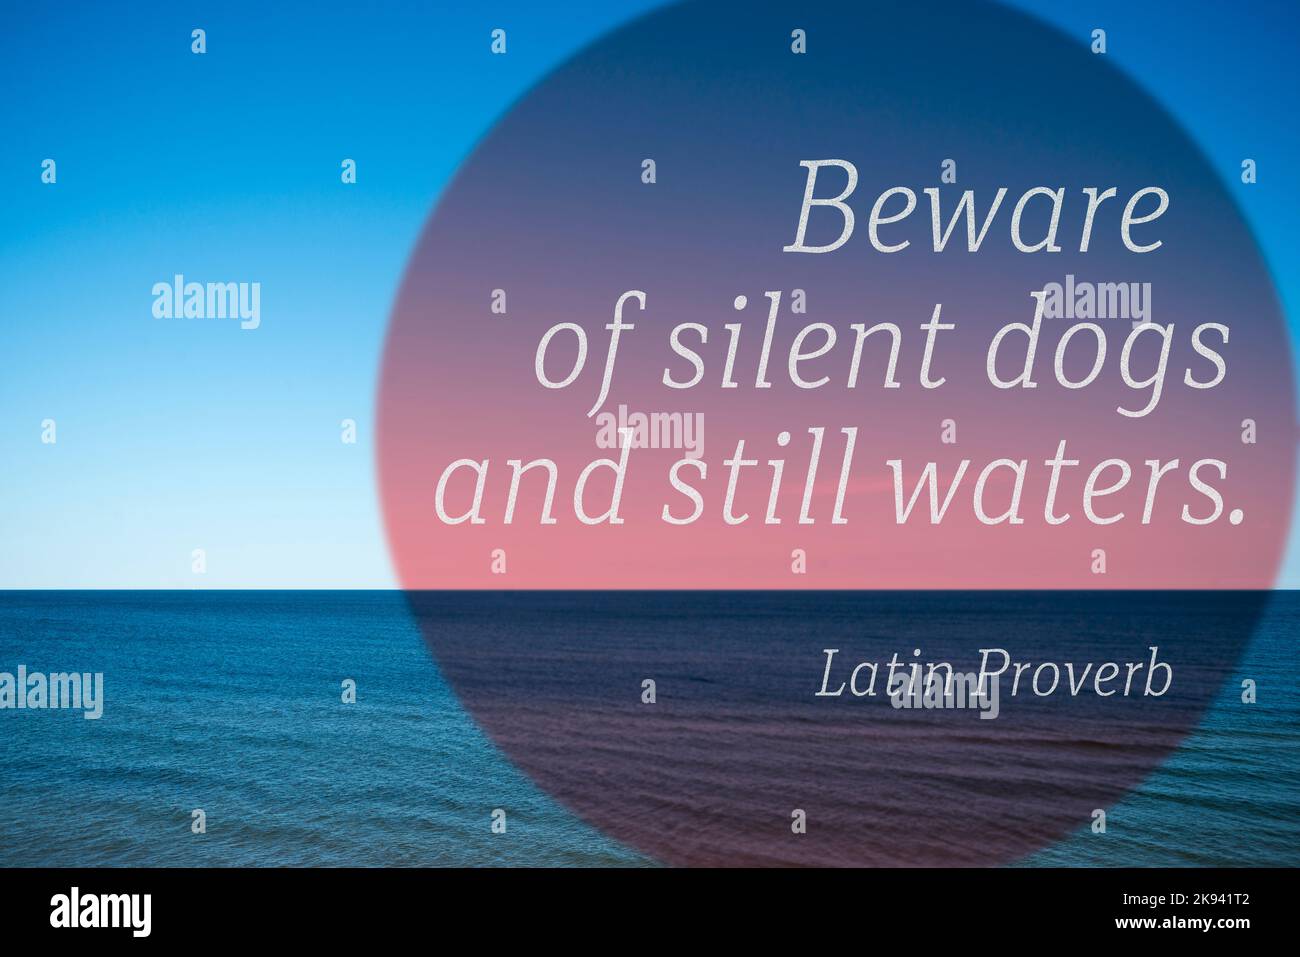 beware of silent dogs and still waters - ancient Latin Proverb printed over photo with calm sea landscape Stock Photo